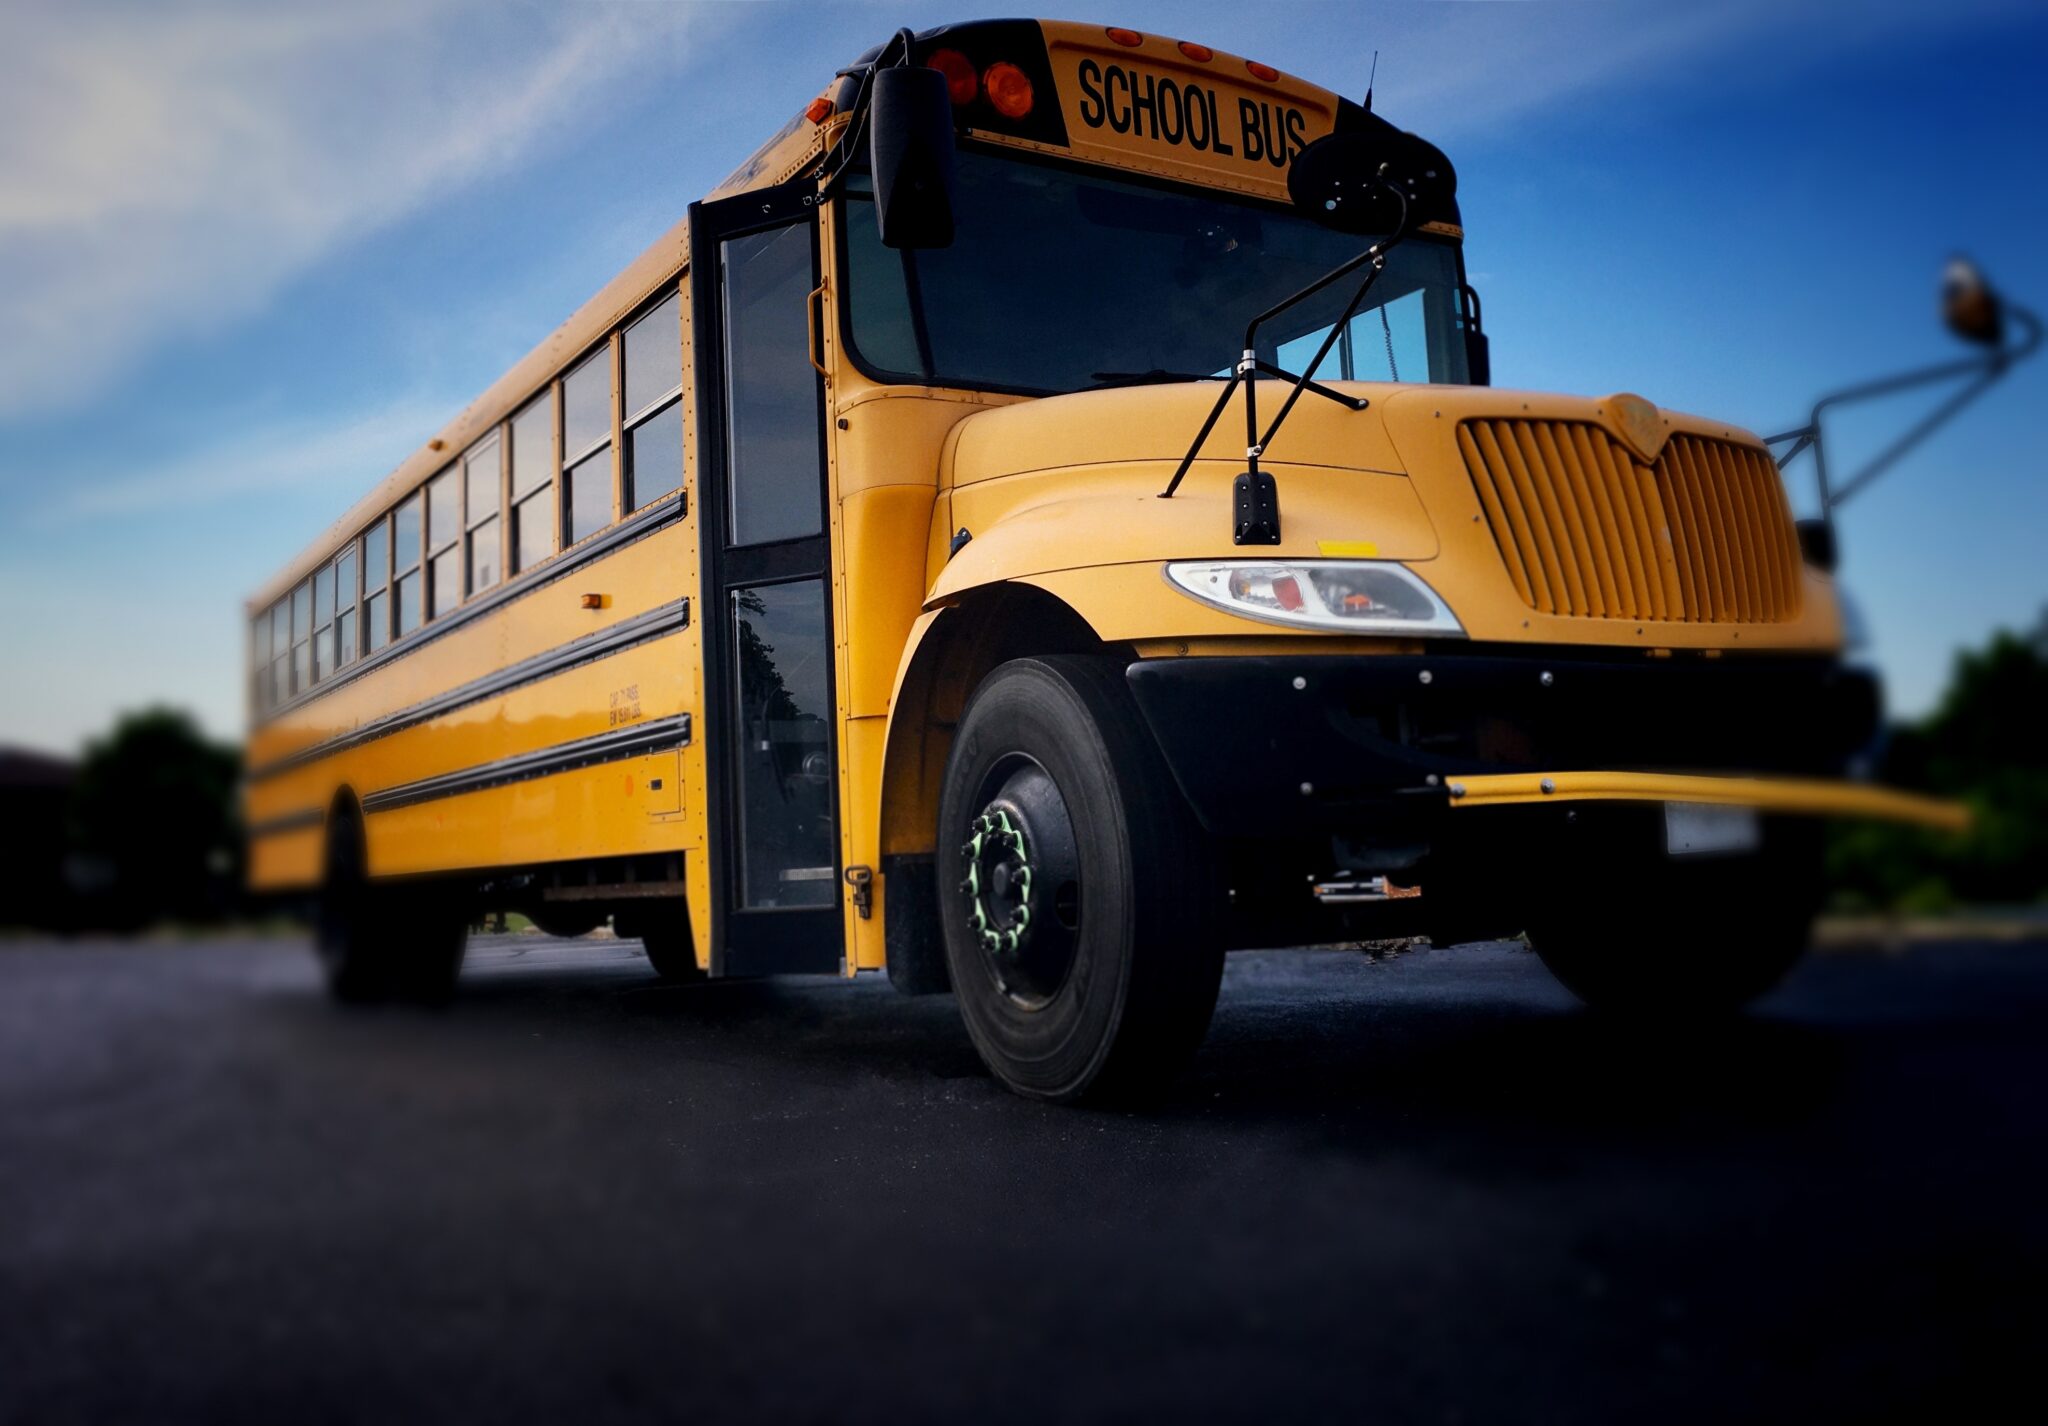 Two DeKalb County parents boarded a school bus and assaulted the driver. What we know